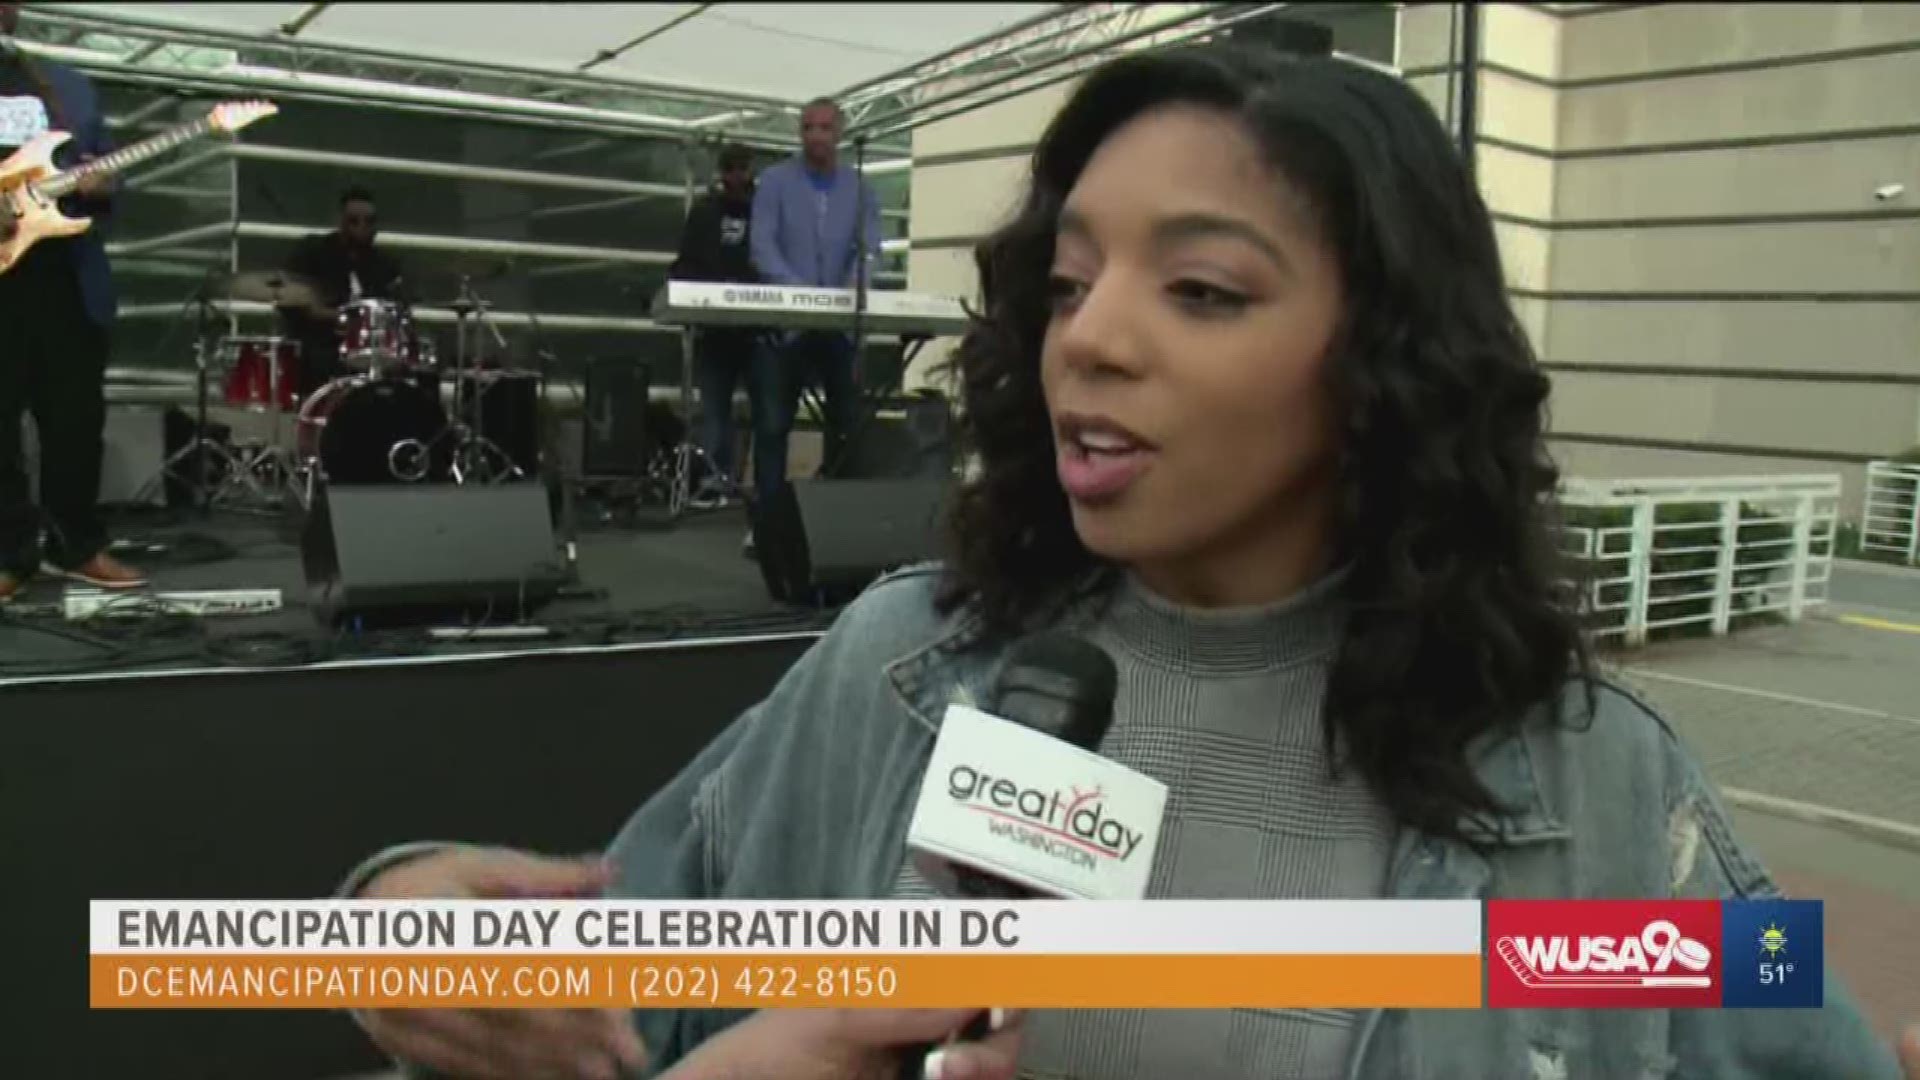 In preparation for the Emancipation Day Celebration  we got to chat with multimedia broadcaster Britt Waters about all that the celebration will entail! Go to dcemancipationday.com or call (202) 442-8150  for more information.